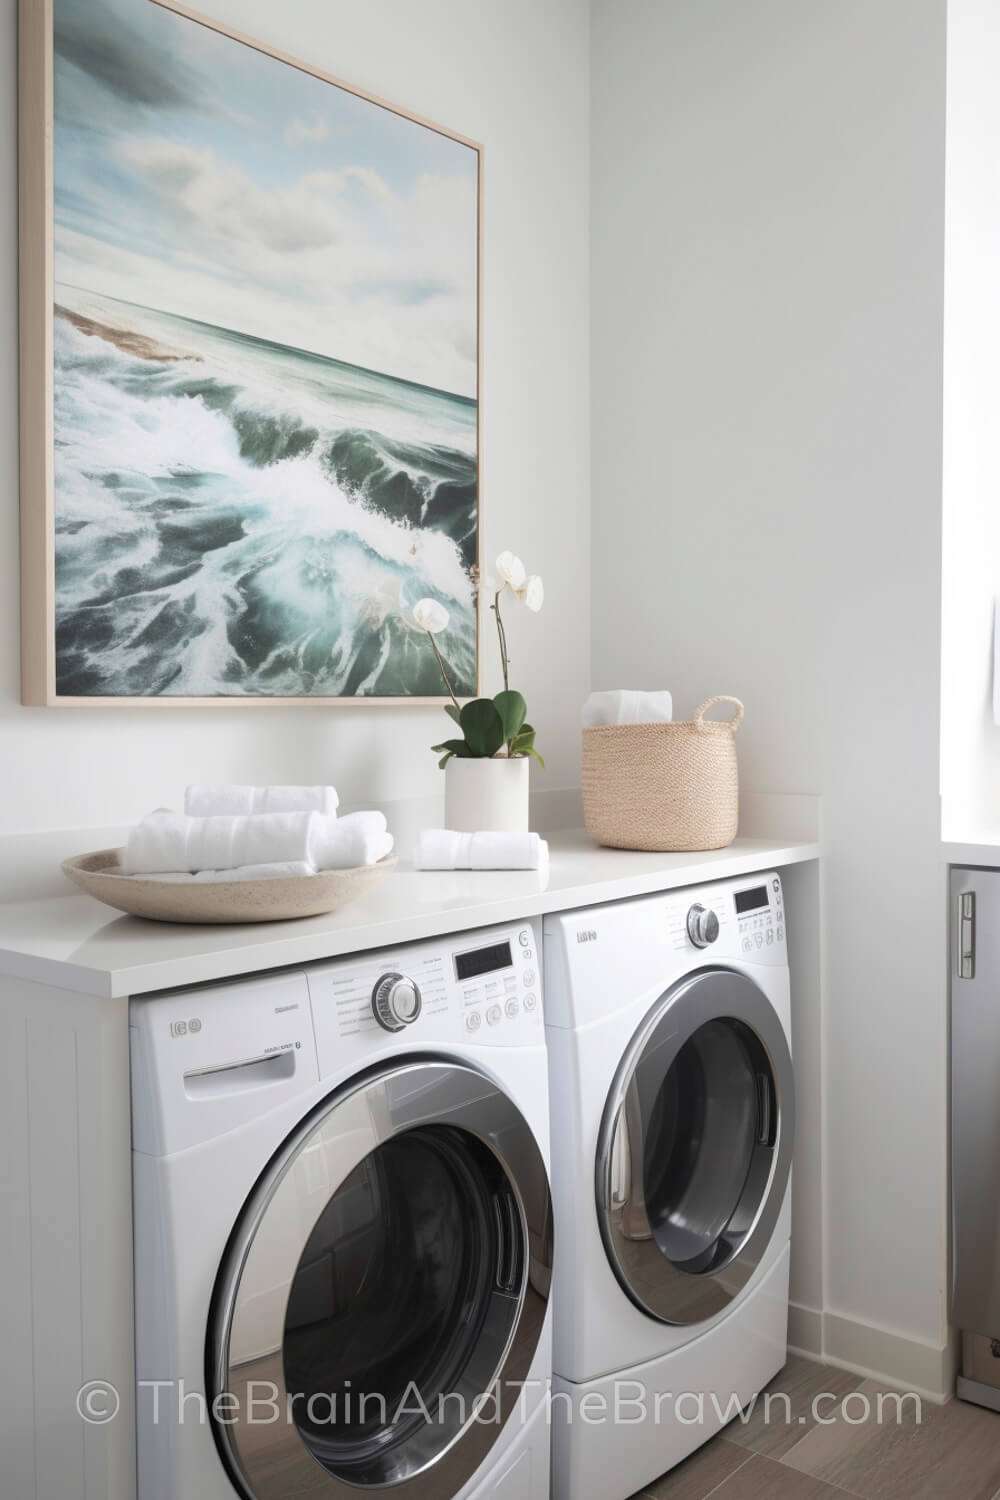 A large piece of laundry room artwork hangs above a washer and dryer. A woven basket, plant and wooden bowl sit on top of the washer and dryer.